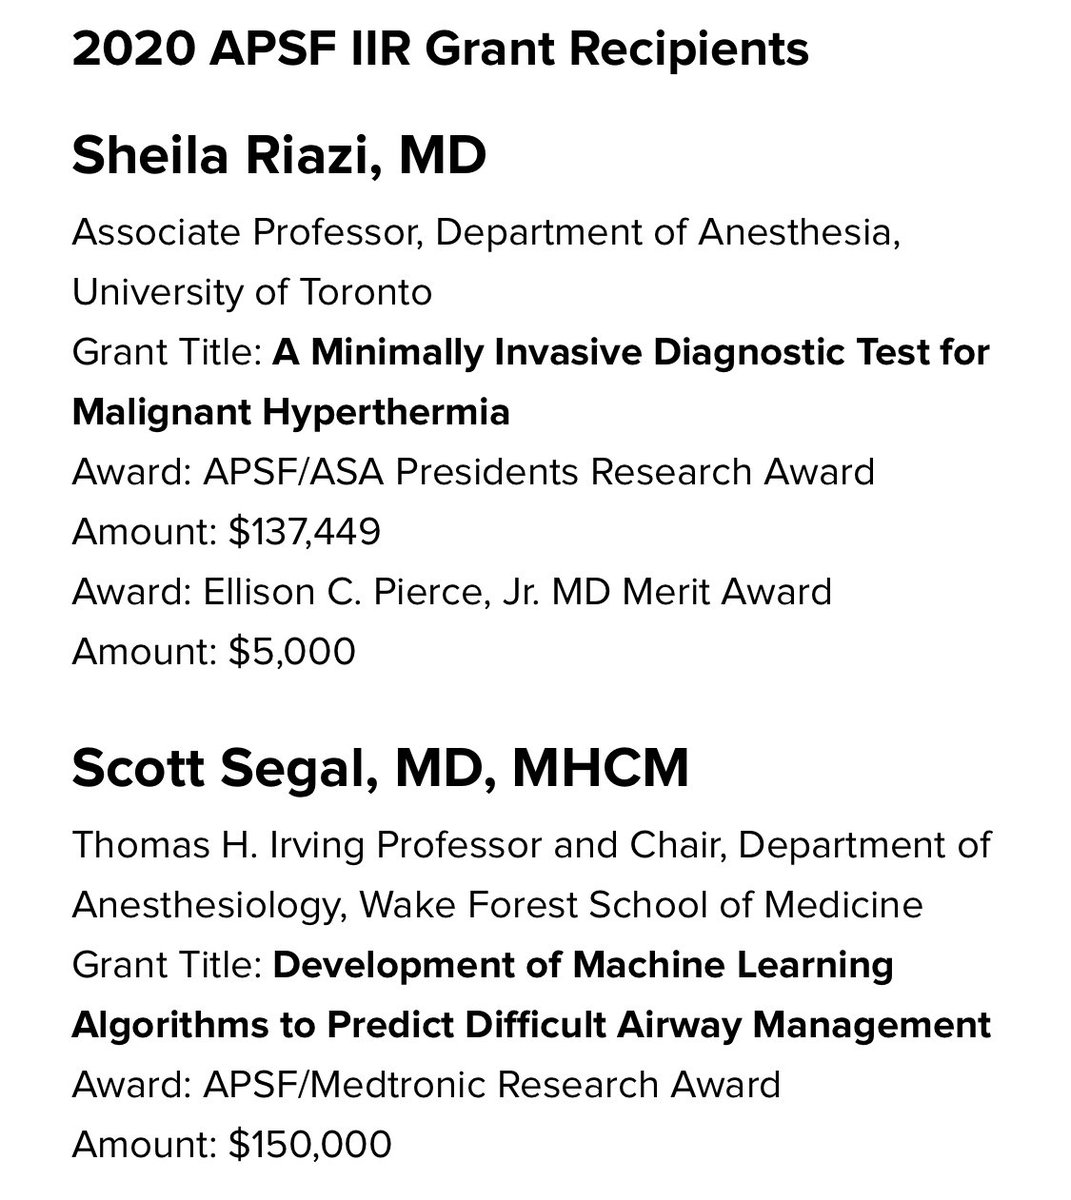 Congratulations to the newly announced 2020 APSF IIR Grant Recipients, Sheila Riazi, MD, and Scott Segal, MD, MCHM! Thank you for your commitment to #patientsafety research! #ptsafety @SheilaRT51 #anesthesia apsf.org/grants-and-awa…